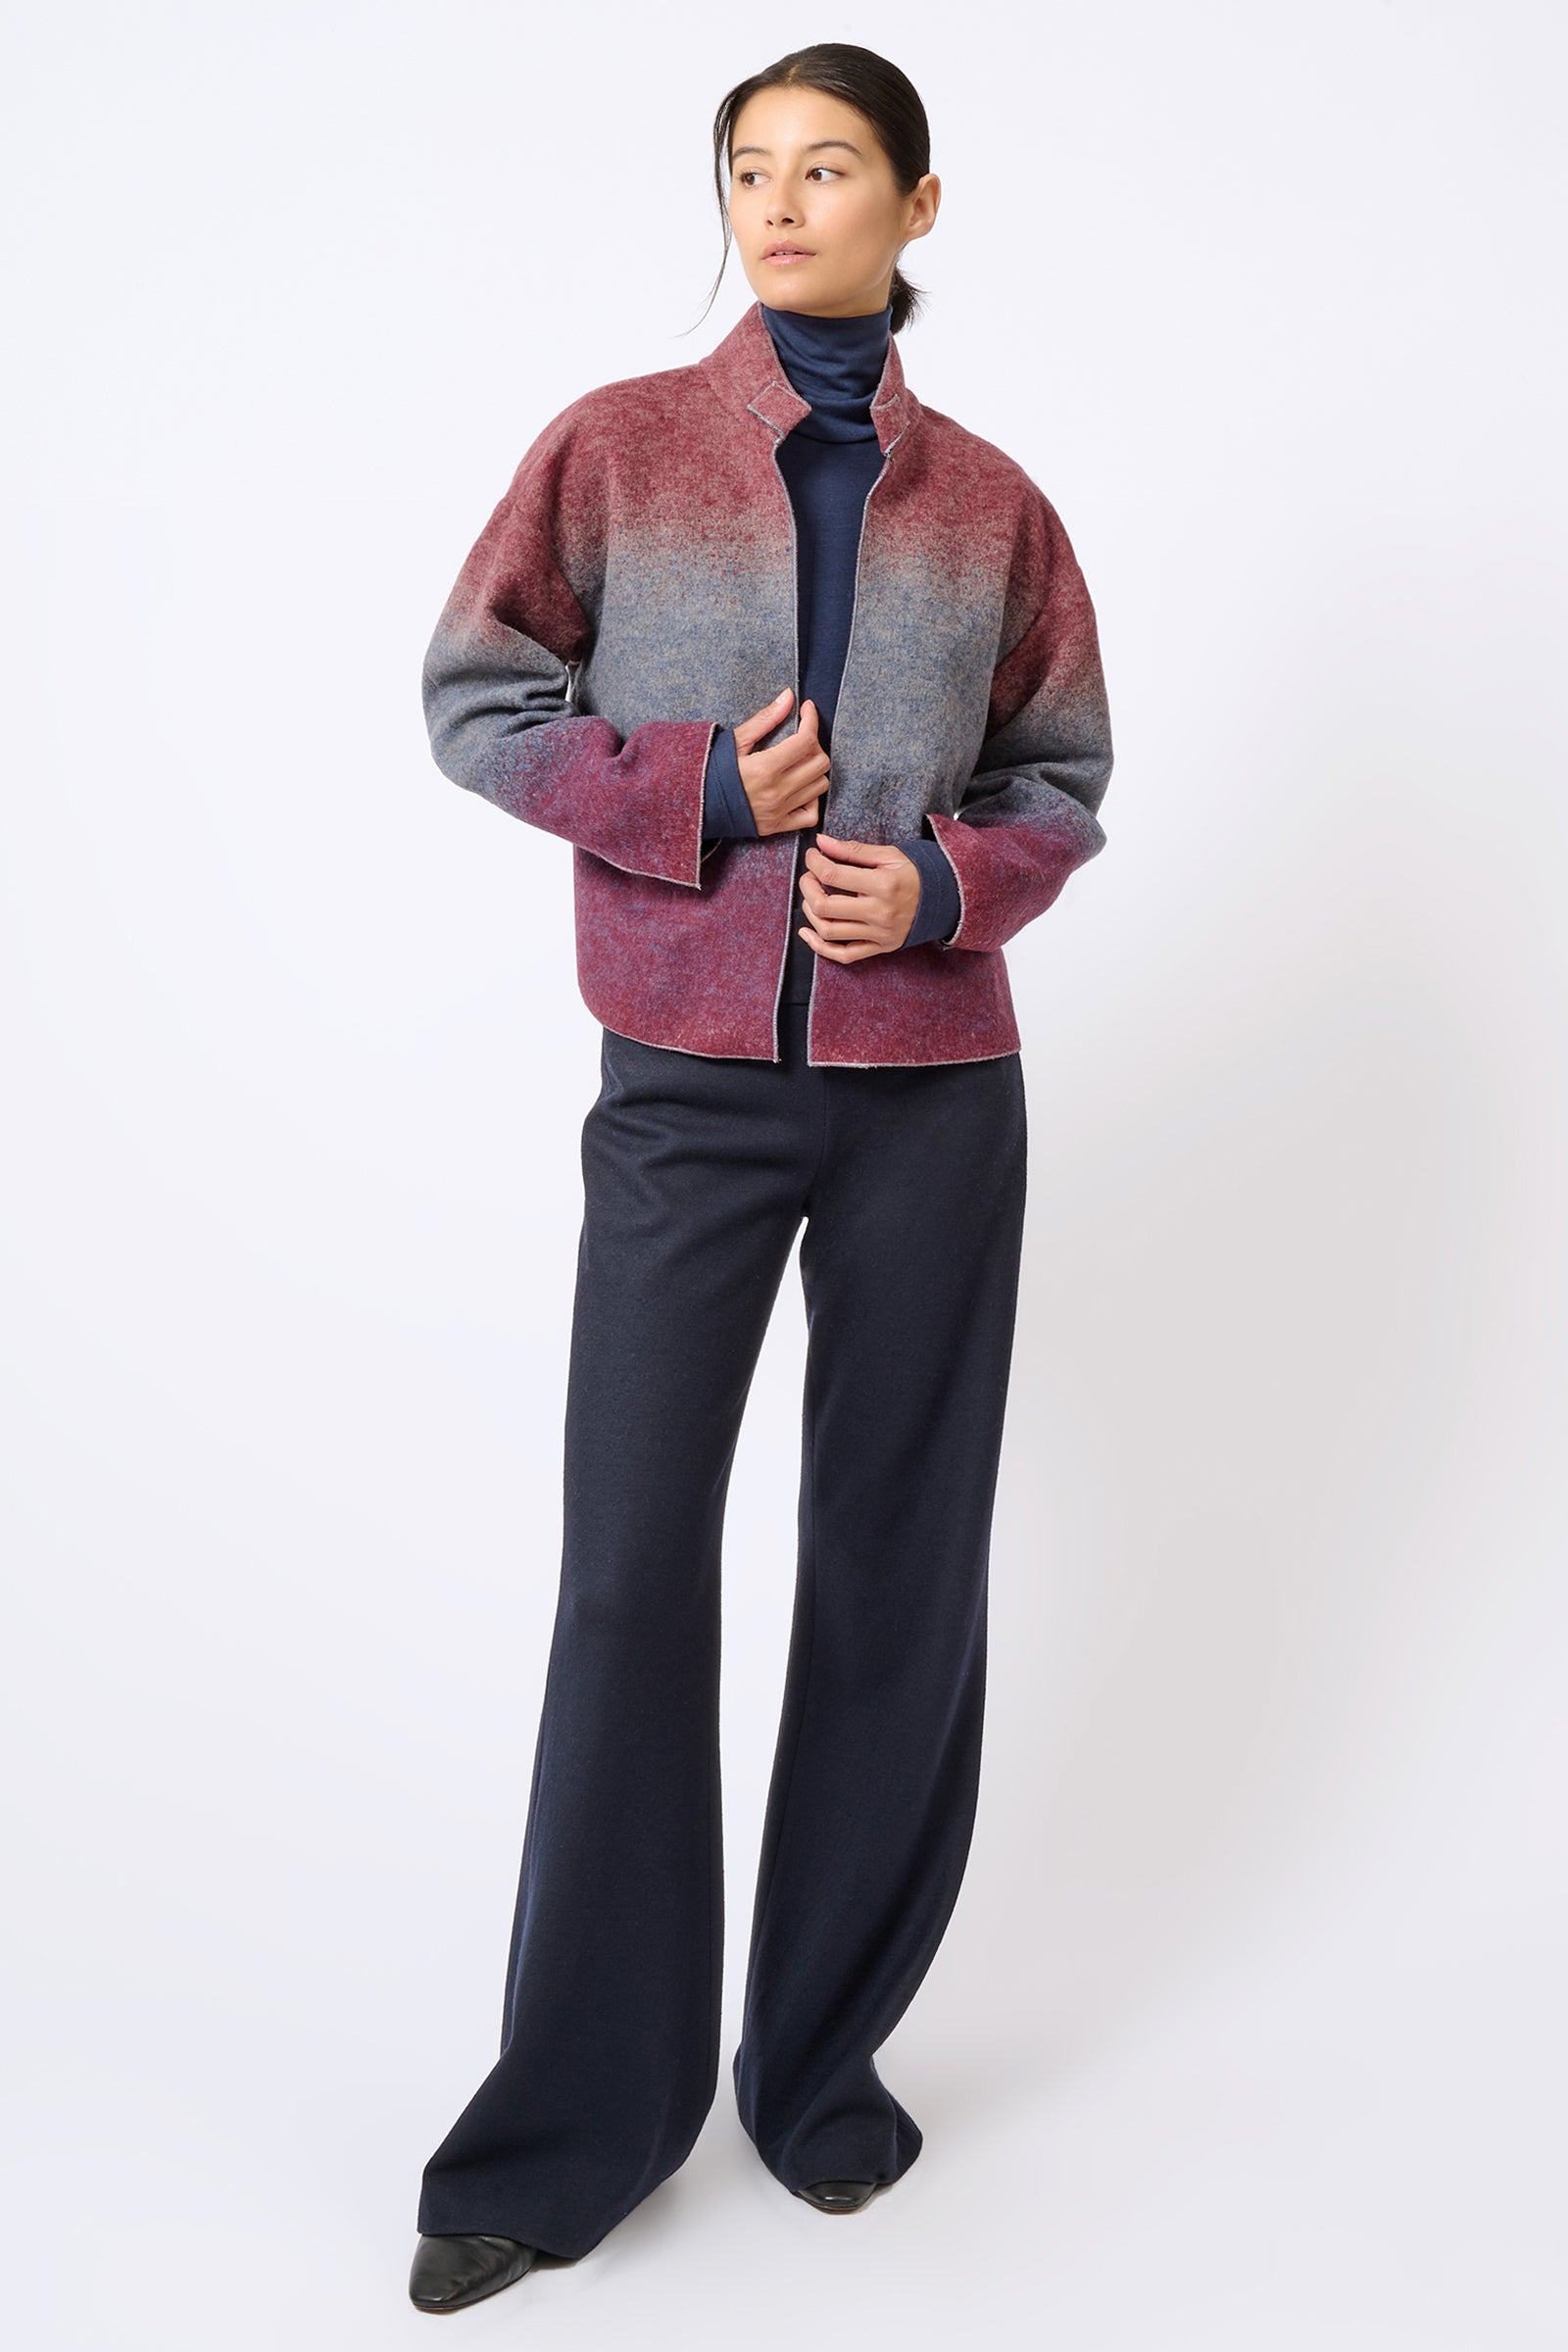 Kal Rieman Kasey Ombre Bomber in Ombre on Model Full Front View